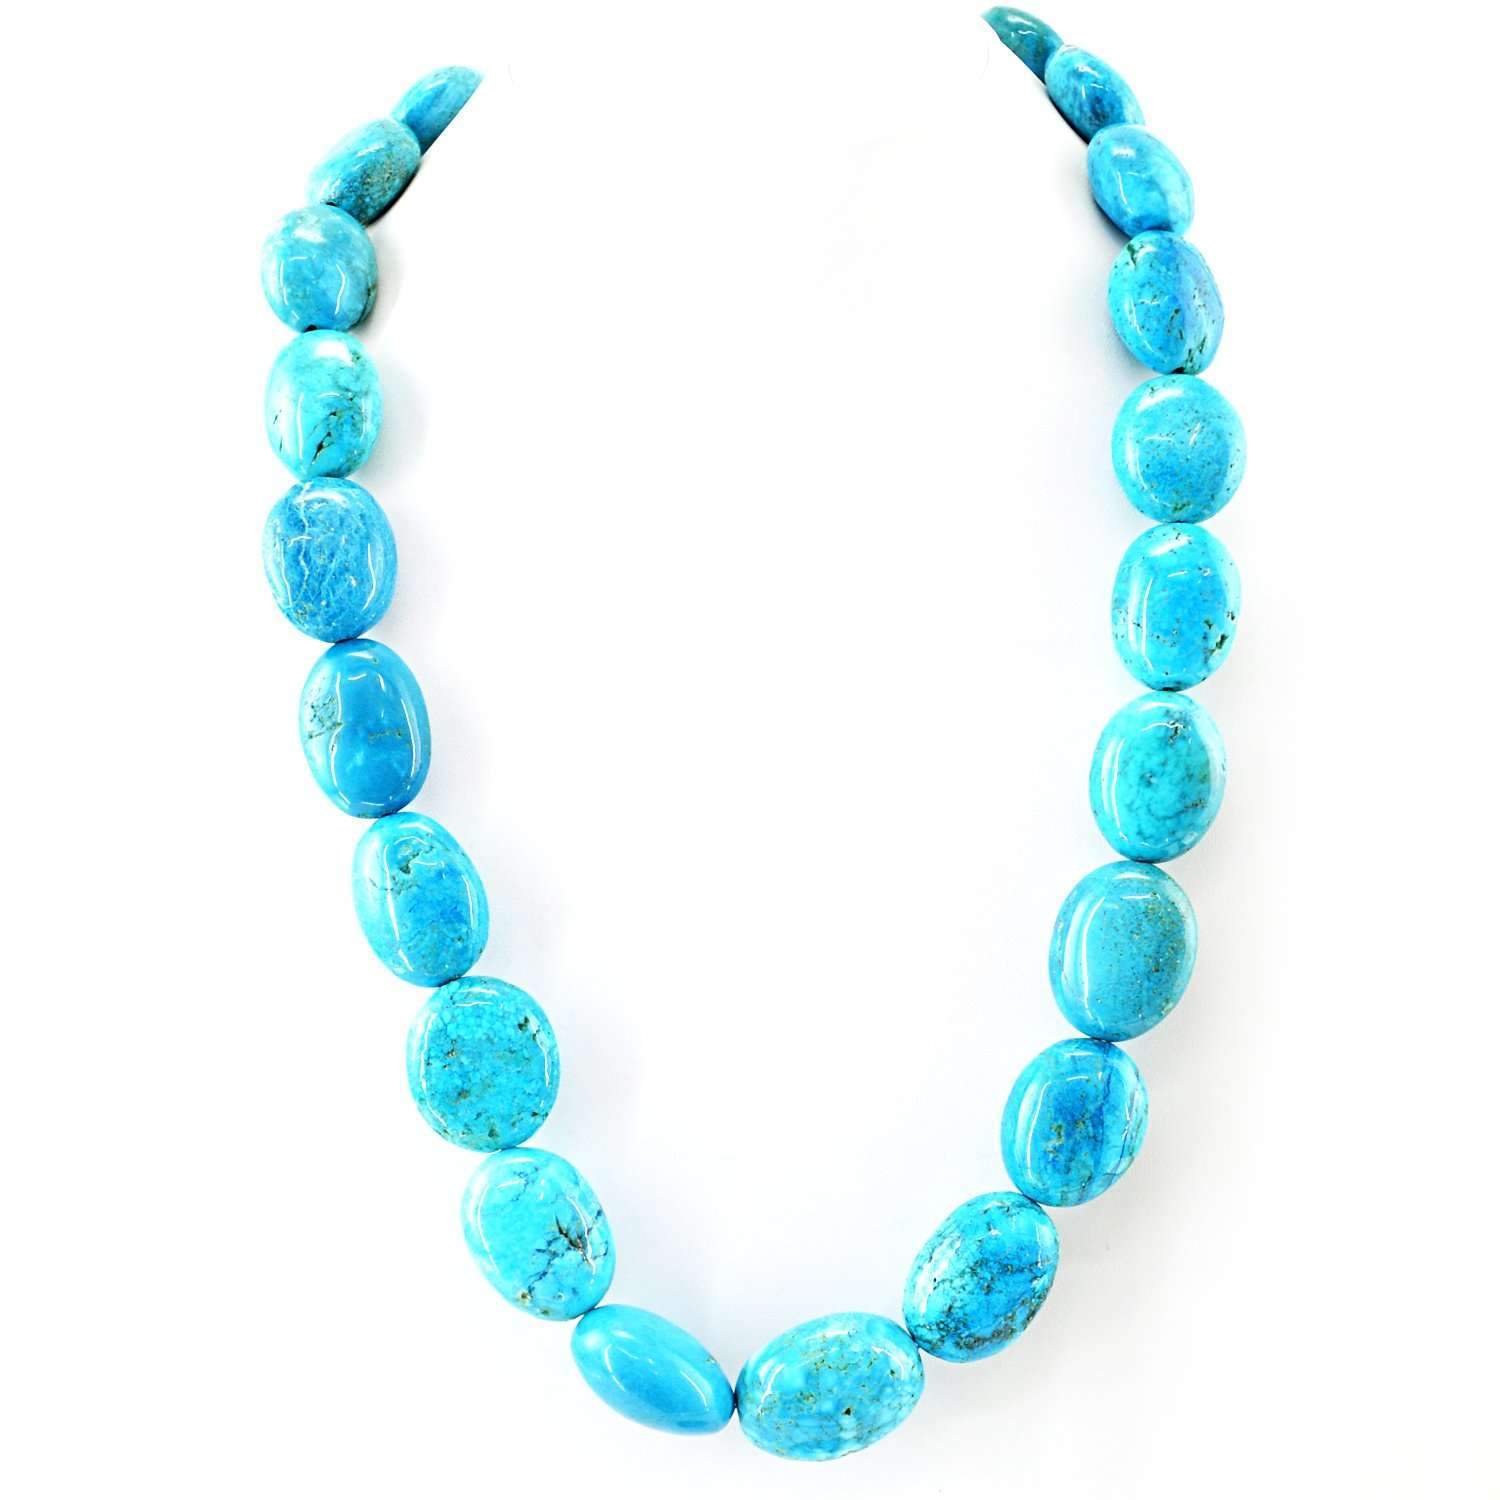 gemsmore:Howlite Necklace Natural 20 Inches Long Oval Shape Huge Beads - Best Quality